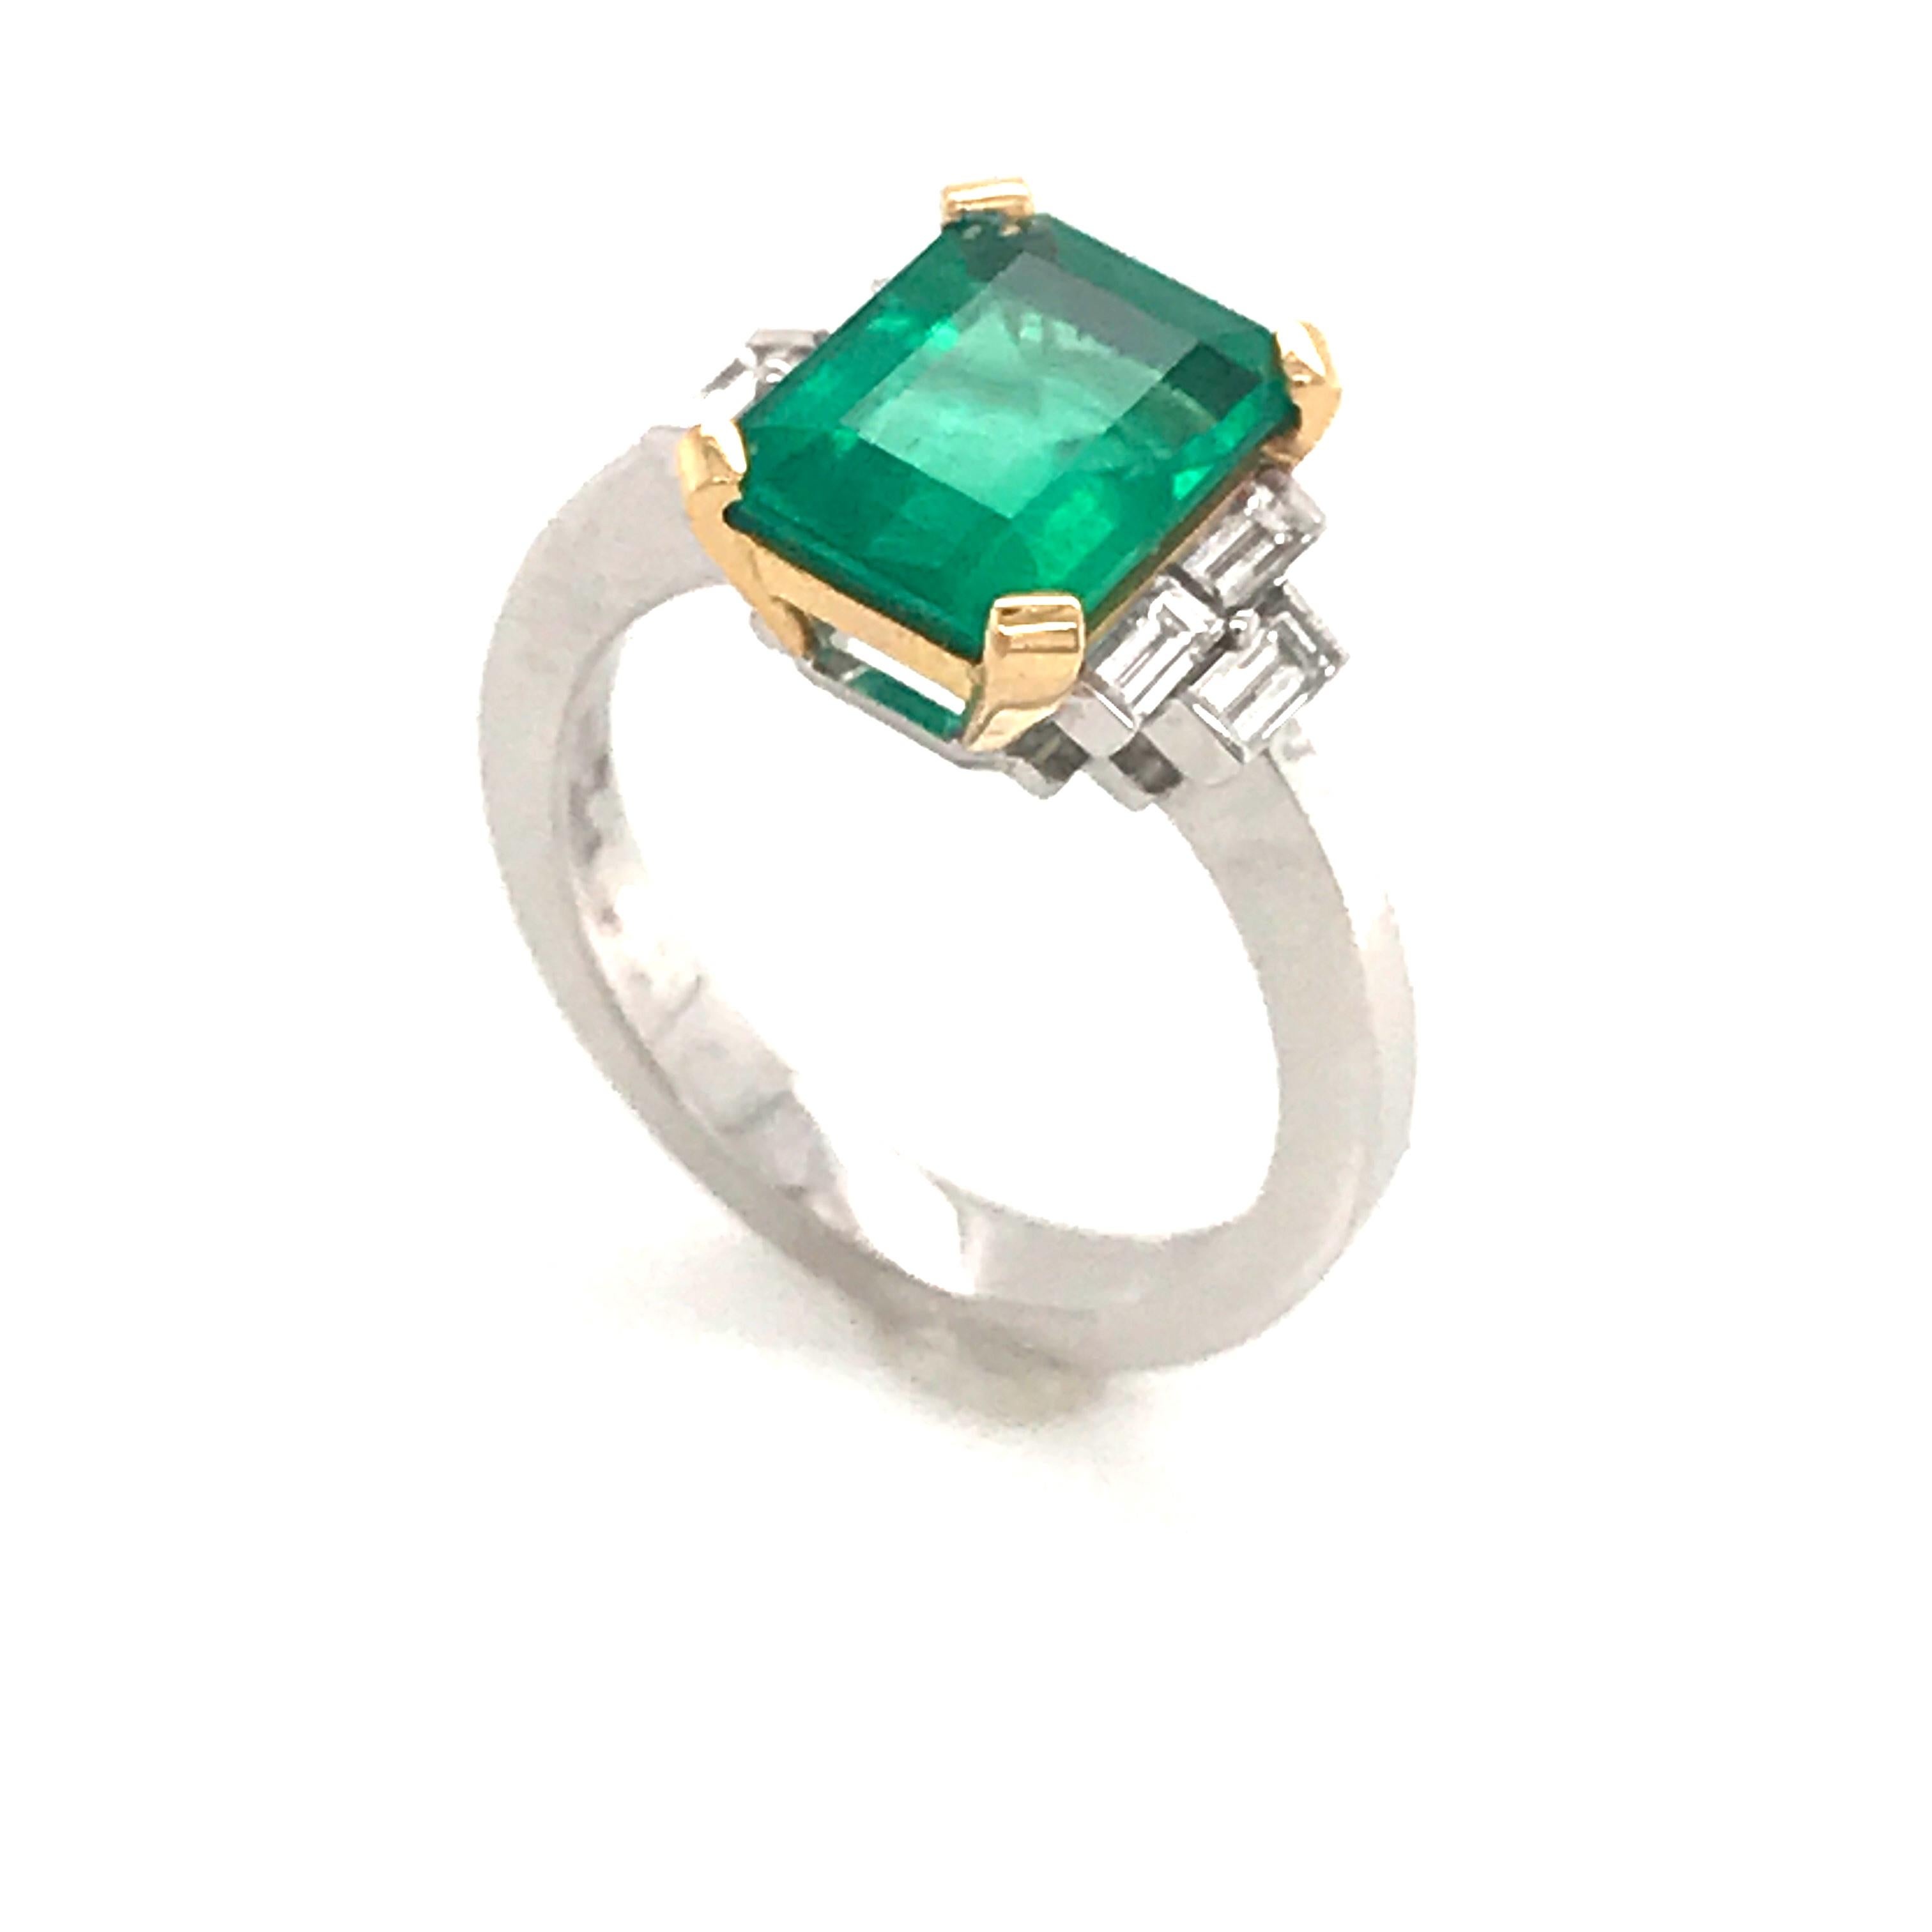 Discover Emerald 2.68 Karat Certified
White Diamonds and on Yellow and White Gold Engagement Ring
Emerald Shaped Emerald 2.68 carat 
White Baguette Diamonds 0.68 carat
White and Yellow Gold 18 Karat / weight Gold 5.50 gr
French size 52.5 US size 6